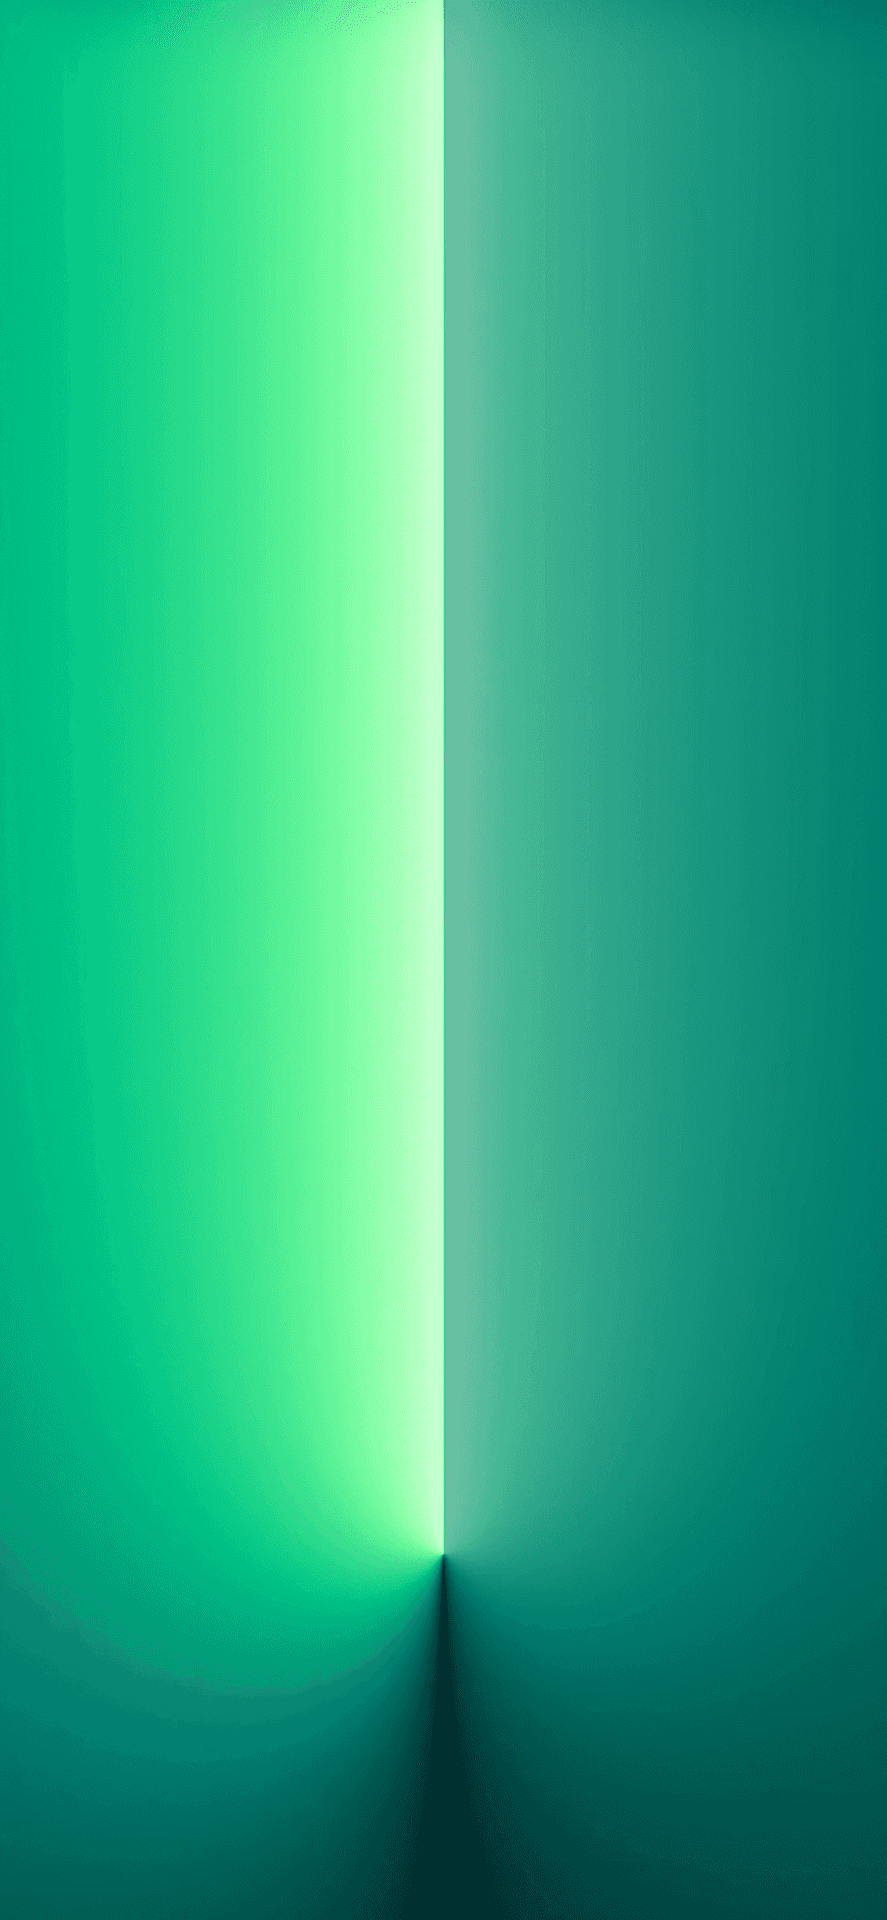 A Green Light Shining On A Green Background